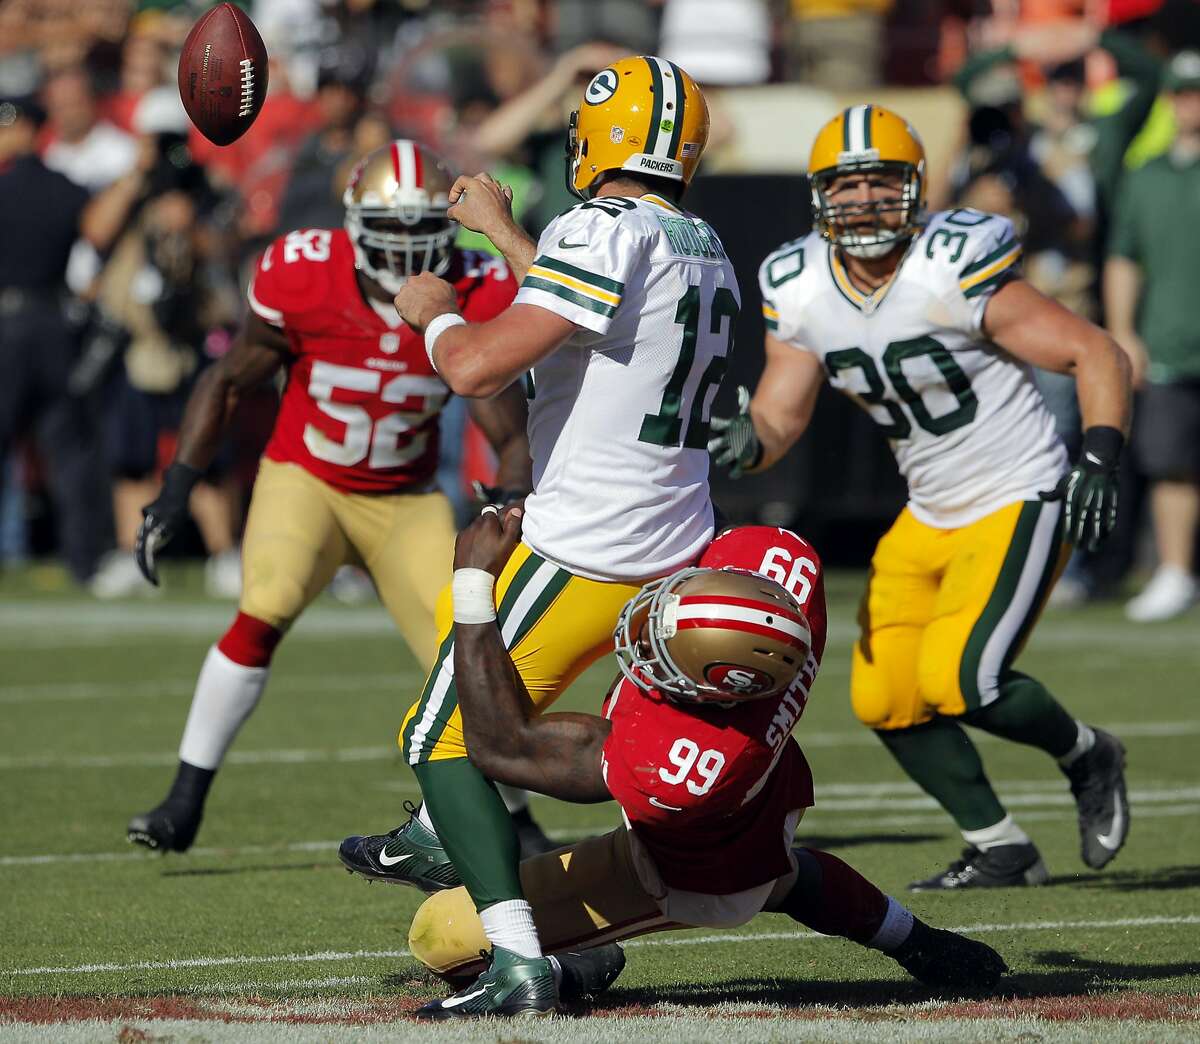 Aldon Smith pressures Aaron Rogers who tries to throw a shuffle pass in the final seconds of the fourth quarter. The San Francisco 49ers played the Green Bay Packers at Candelstick Park in San Francisco, Calif, on Sunday, September 8, 2013.